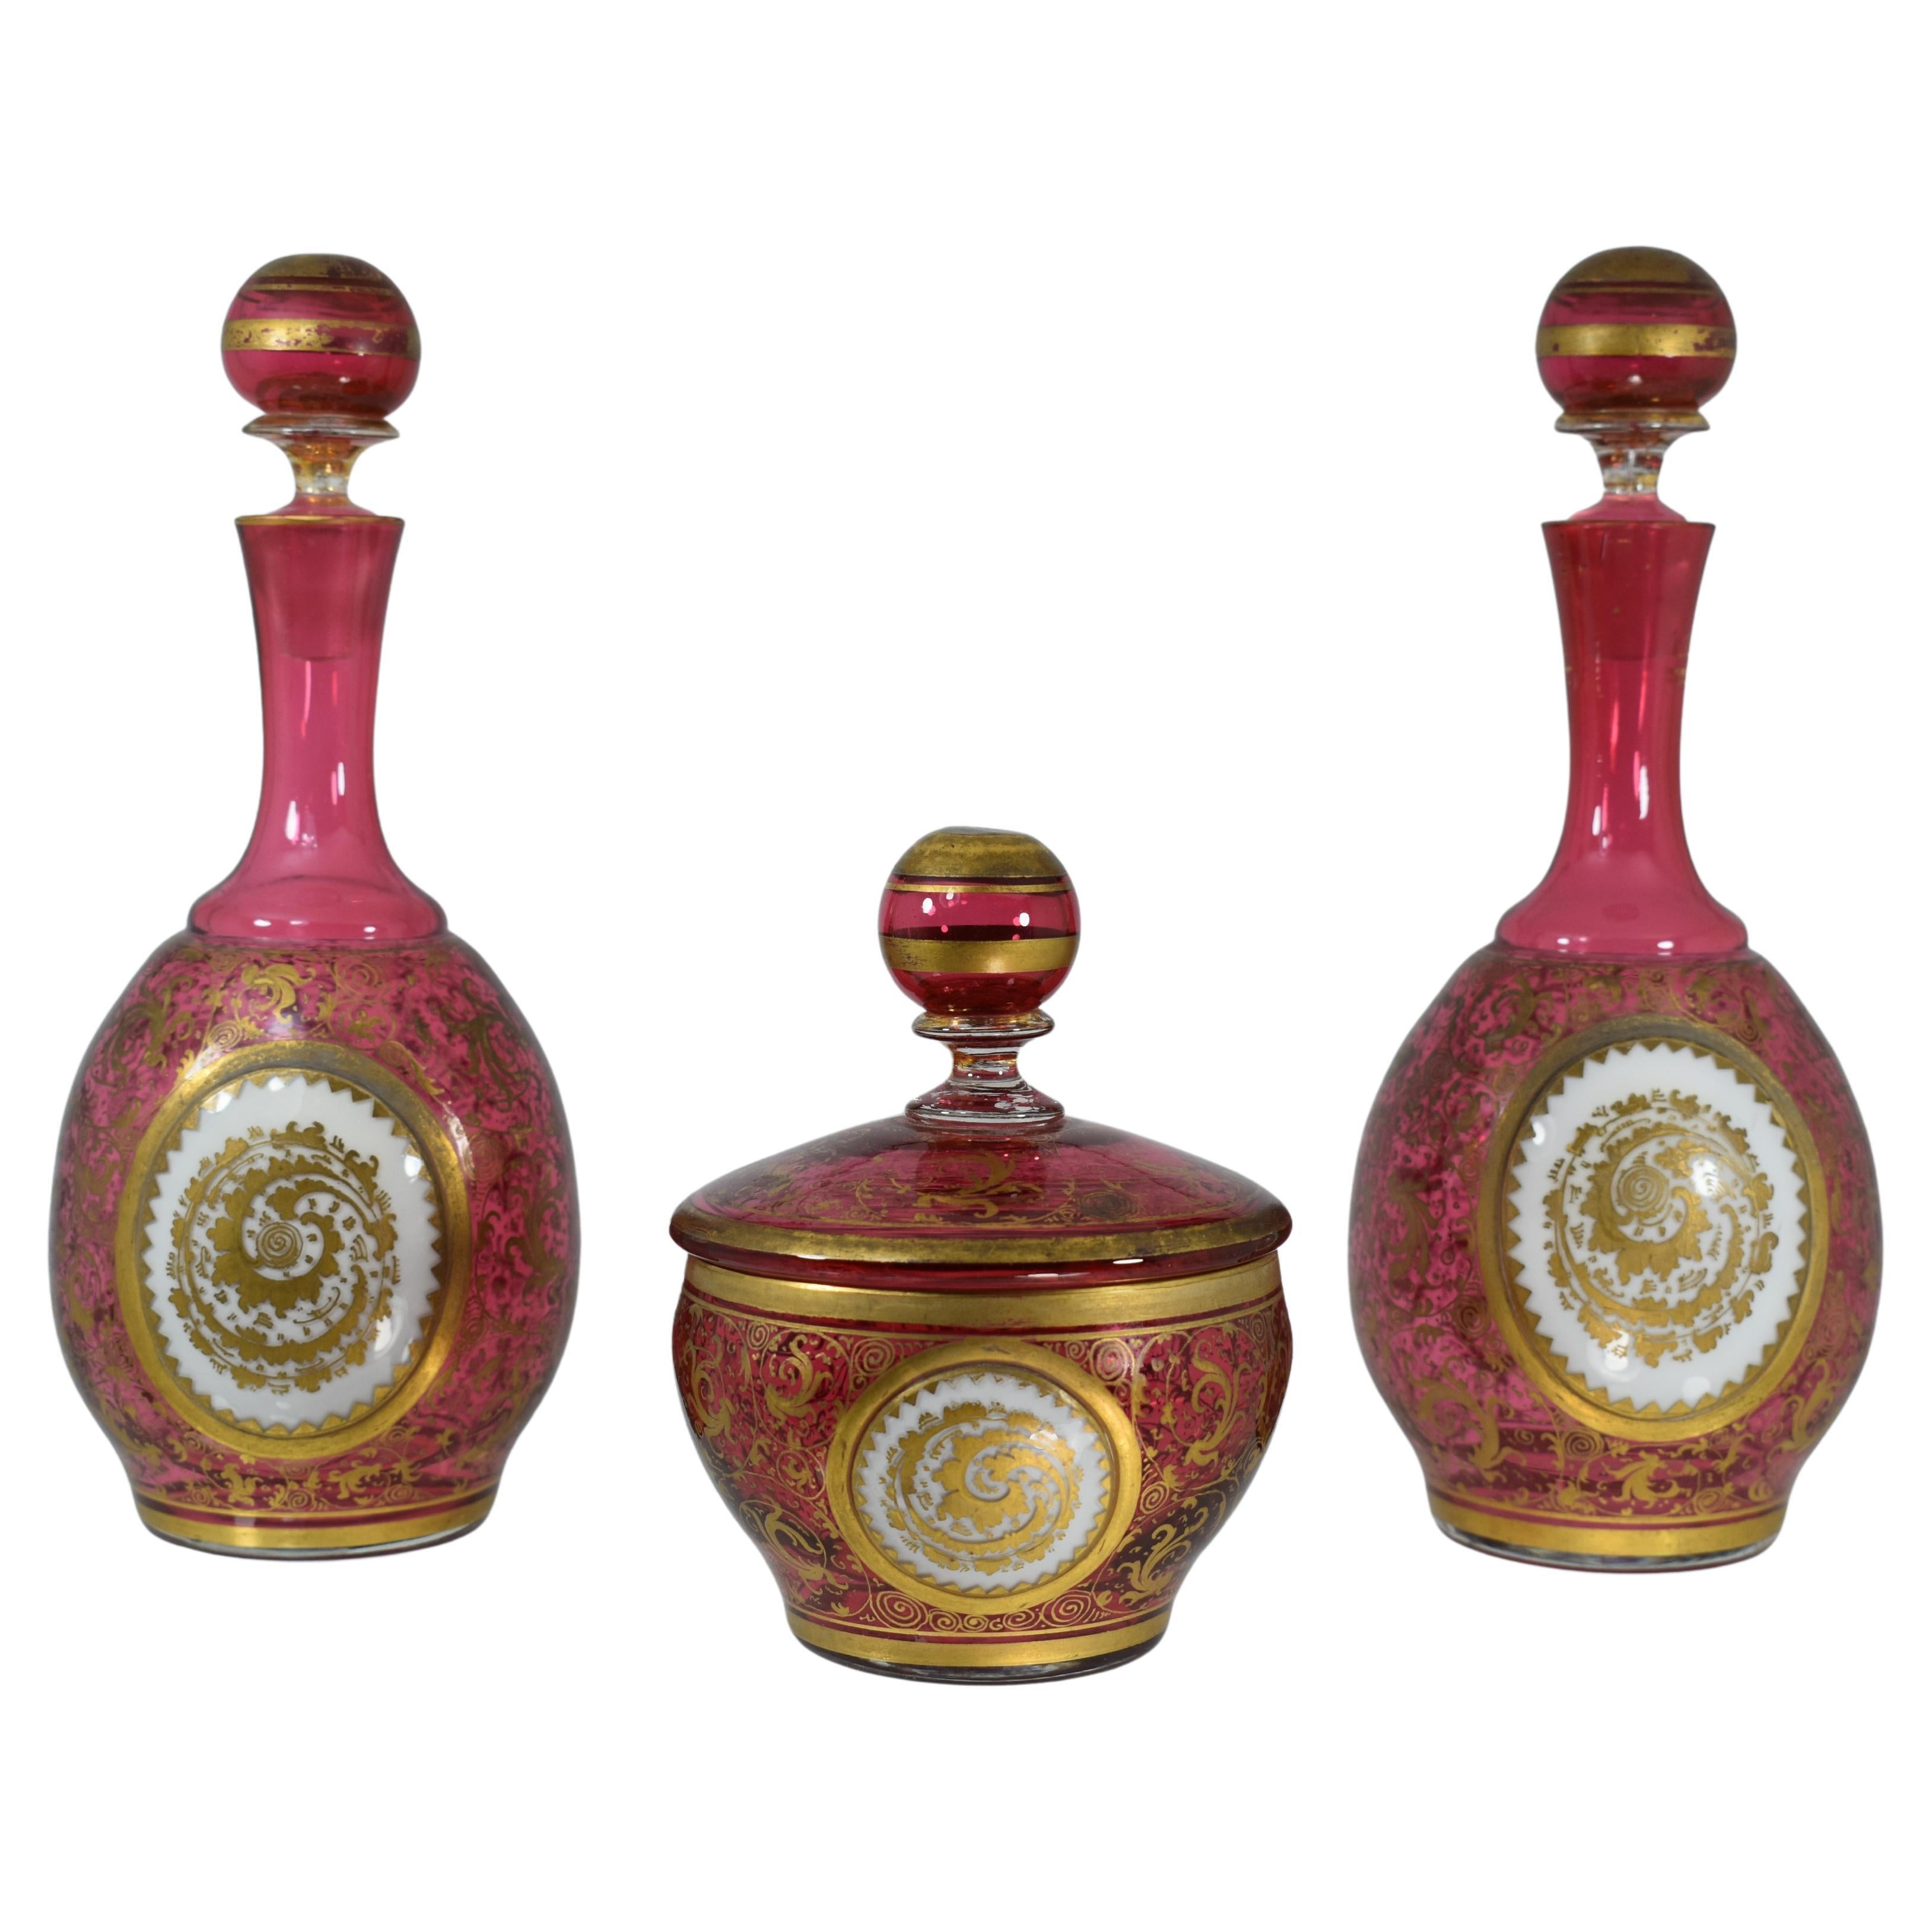 A Set of two similar bottles with stoppers and one bowl with cover made of cranberry glass with white opaque overlay, the bottles with circular baluster formed body, richly decorated with fine gilding all around, all three parts are applied with